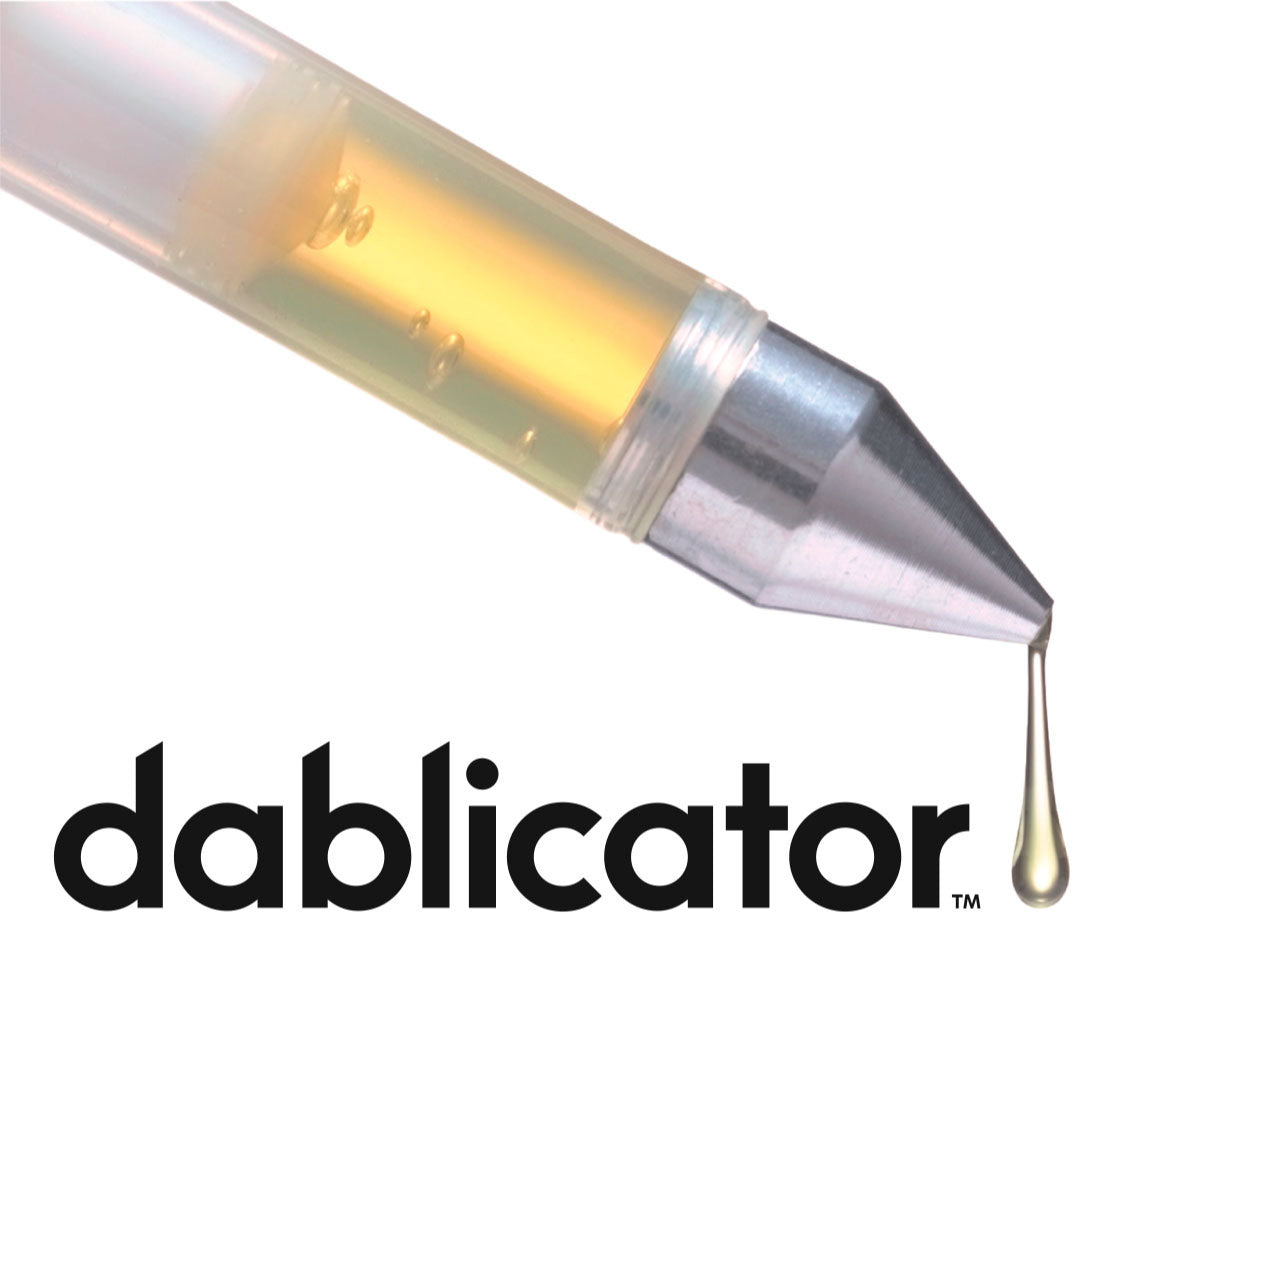 Image of oil dripping from Dablicator Oil Applicator.